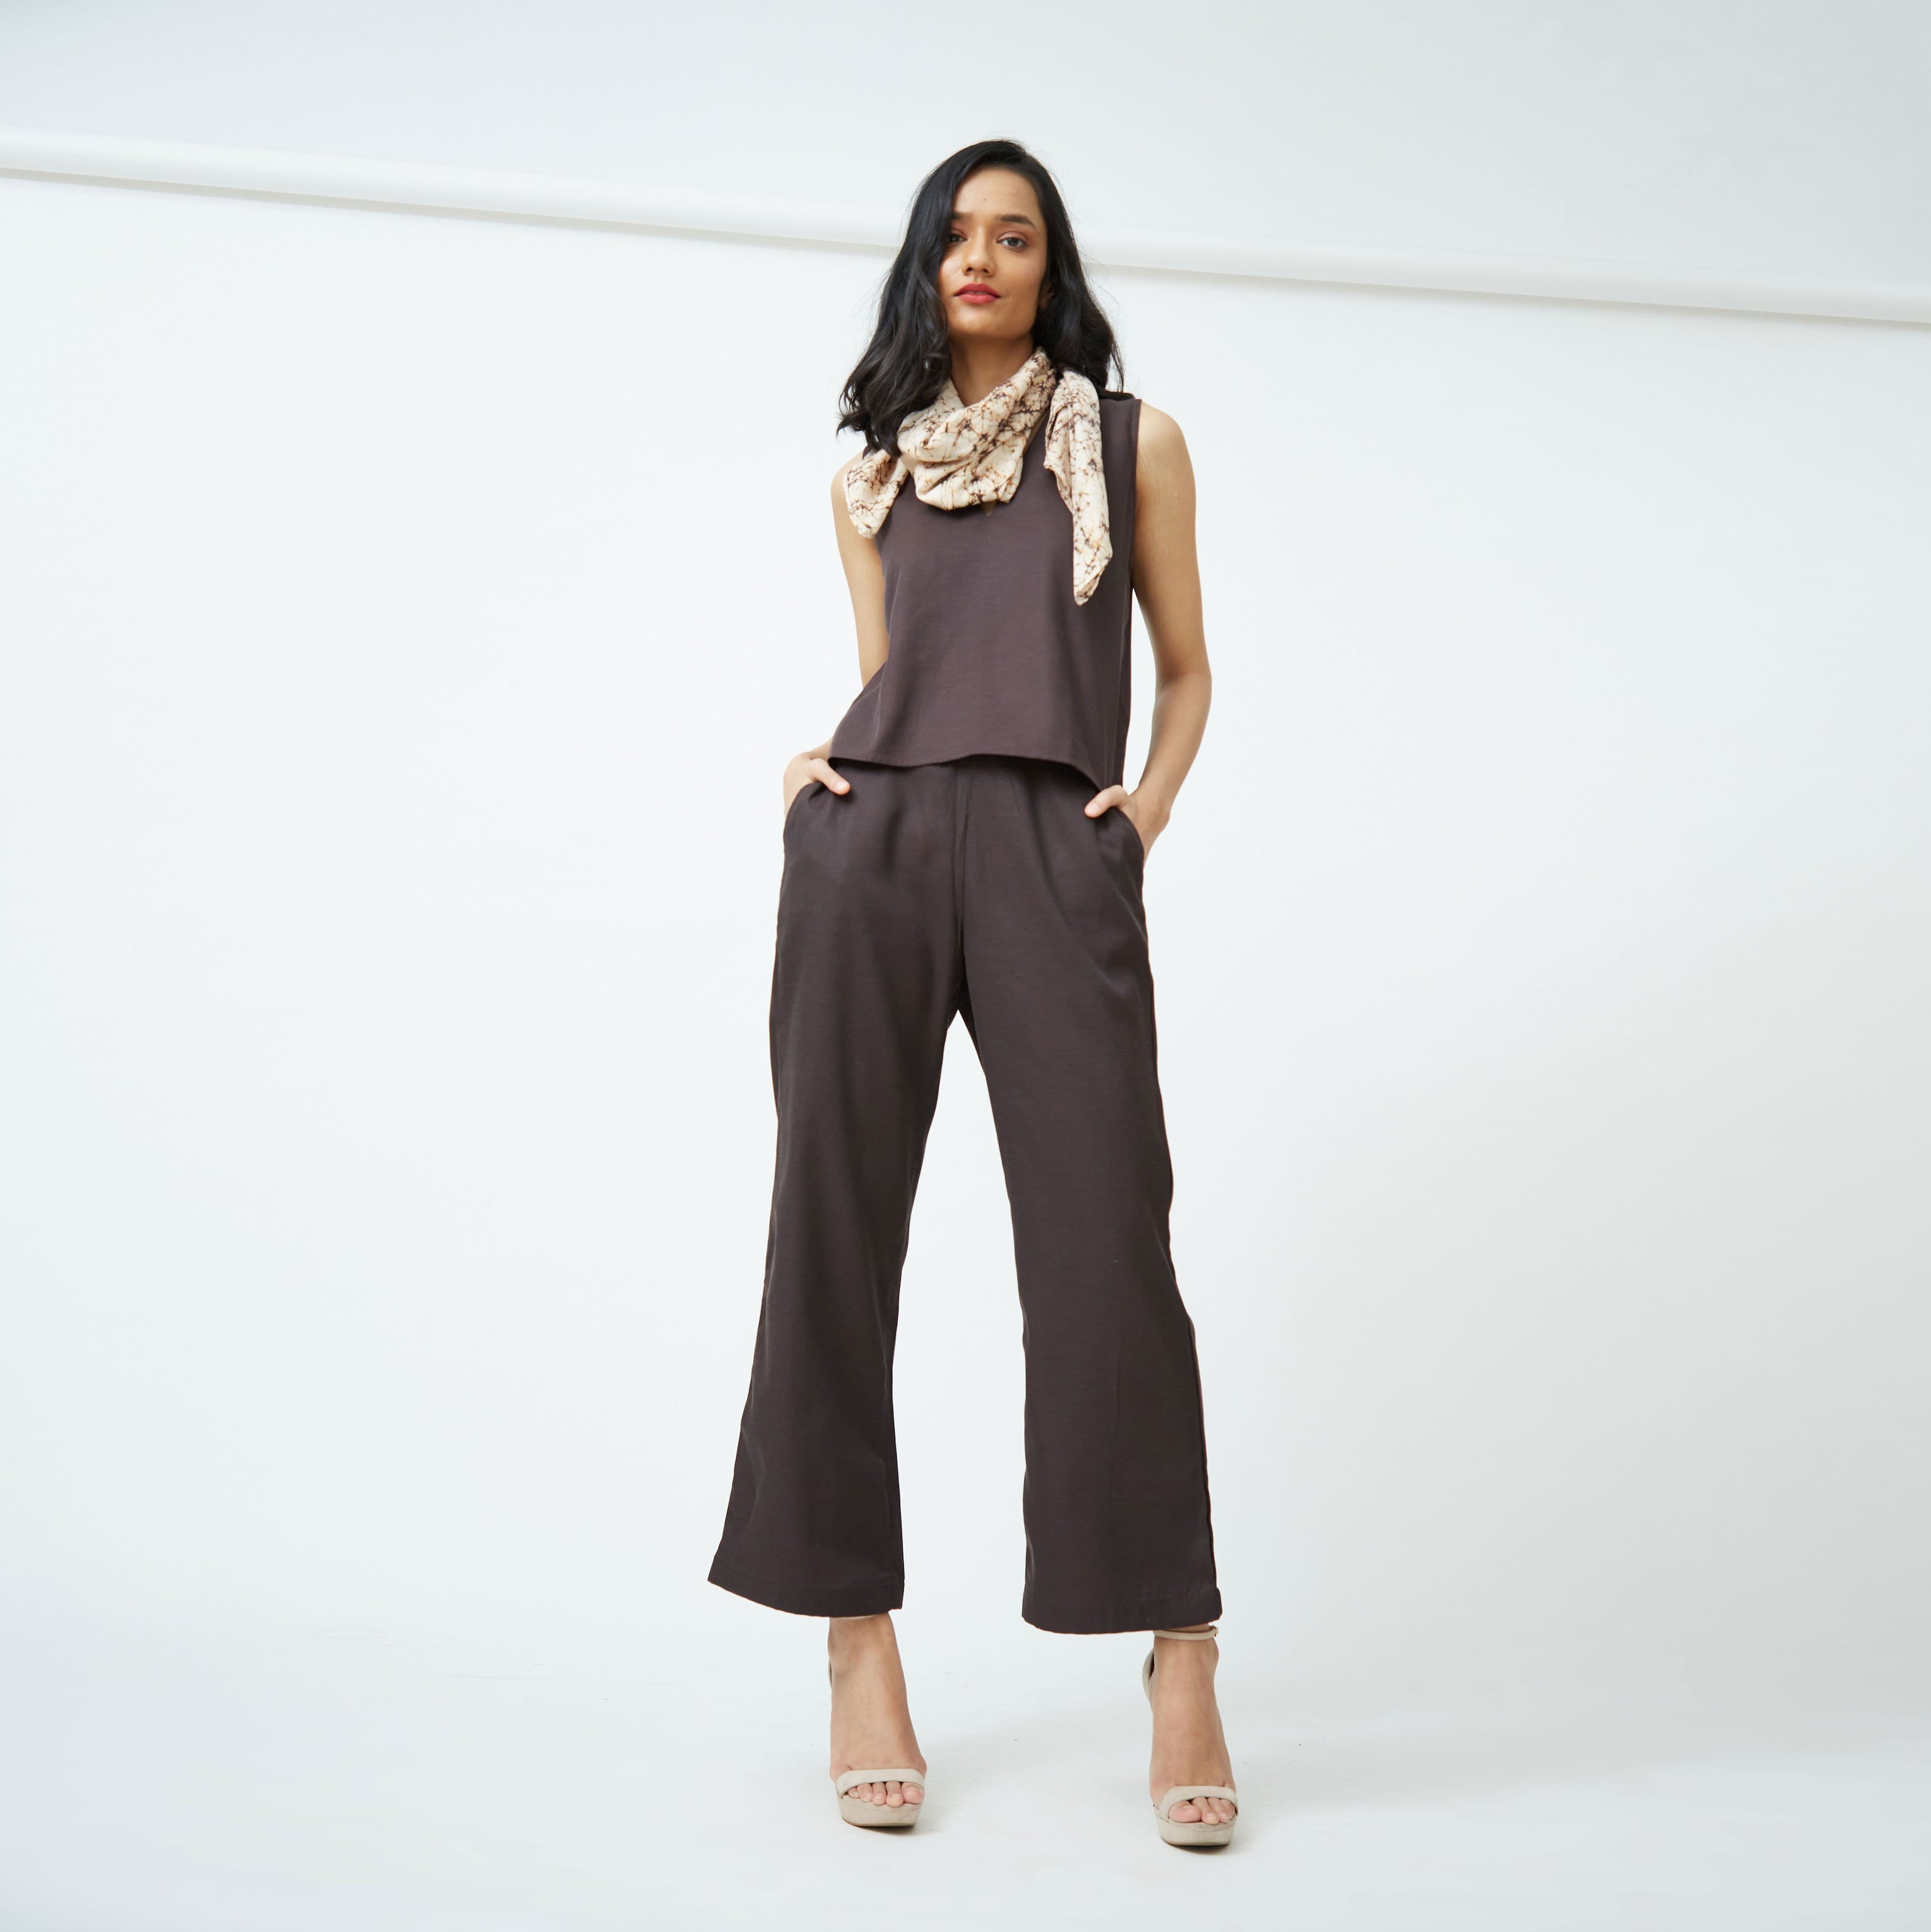 Saltpetre womens wear, indo-western co ord sets for semi formal, casual, occassional wear. Comfortably elegant set of sleeveless top, scarf and ankle length pants in coffee brown colour.